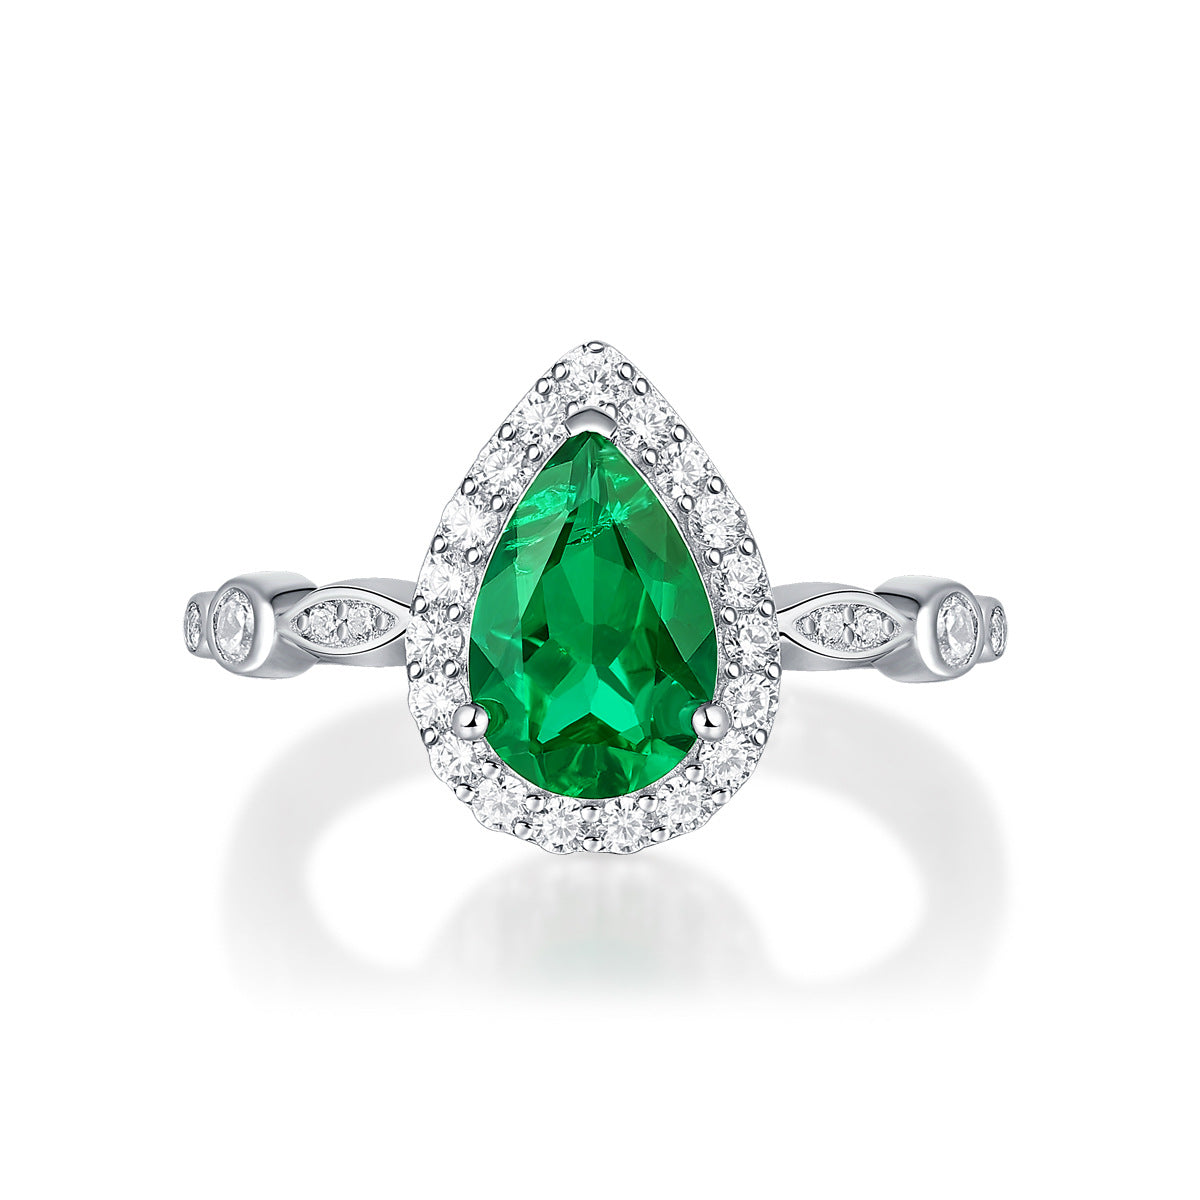 Emerald Teardrop Engagement Ring - HERS